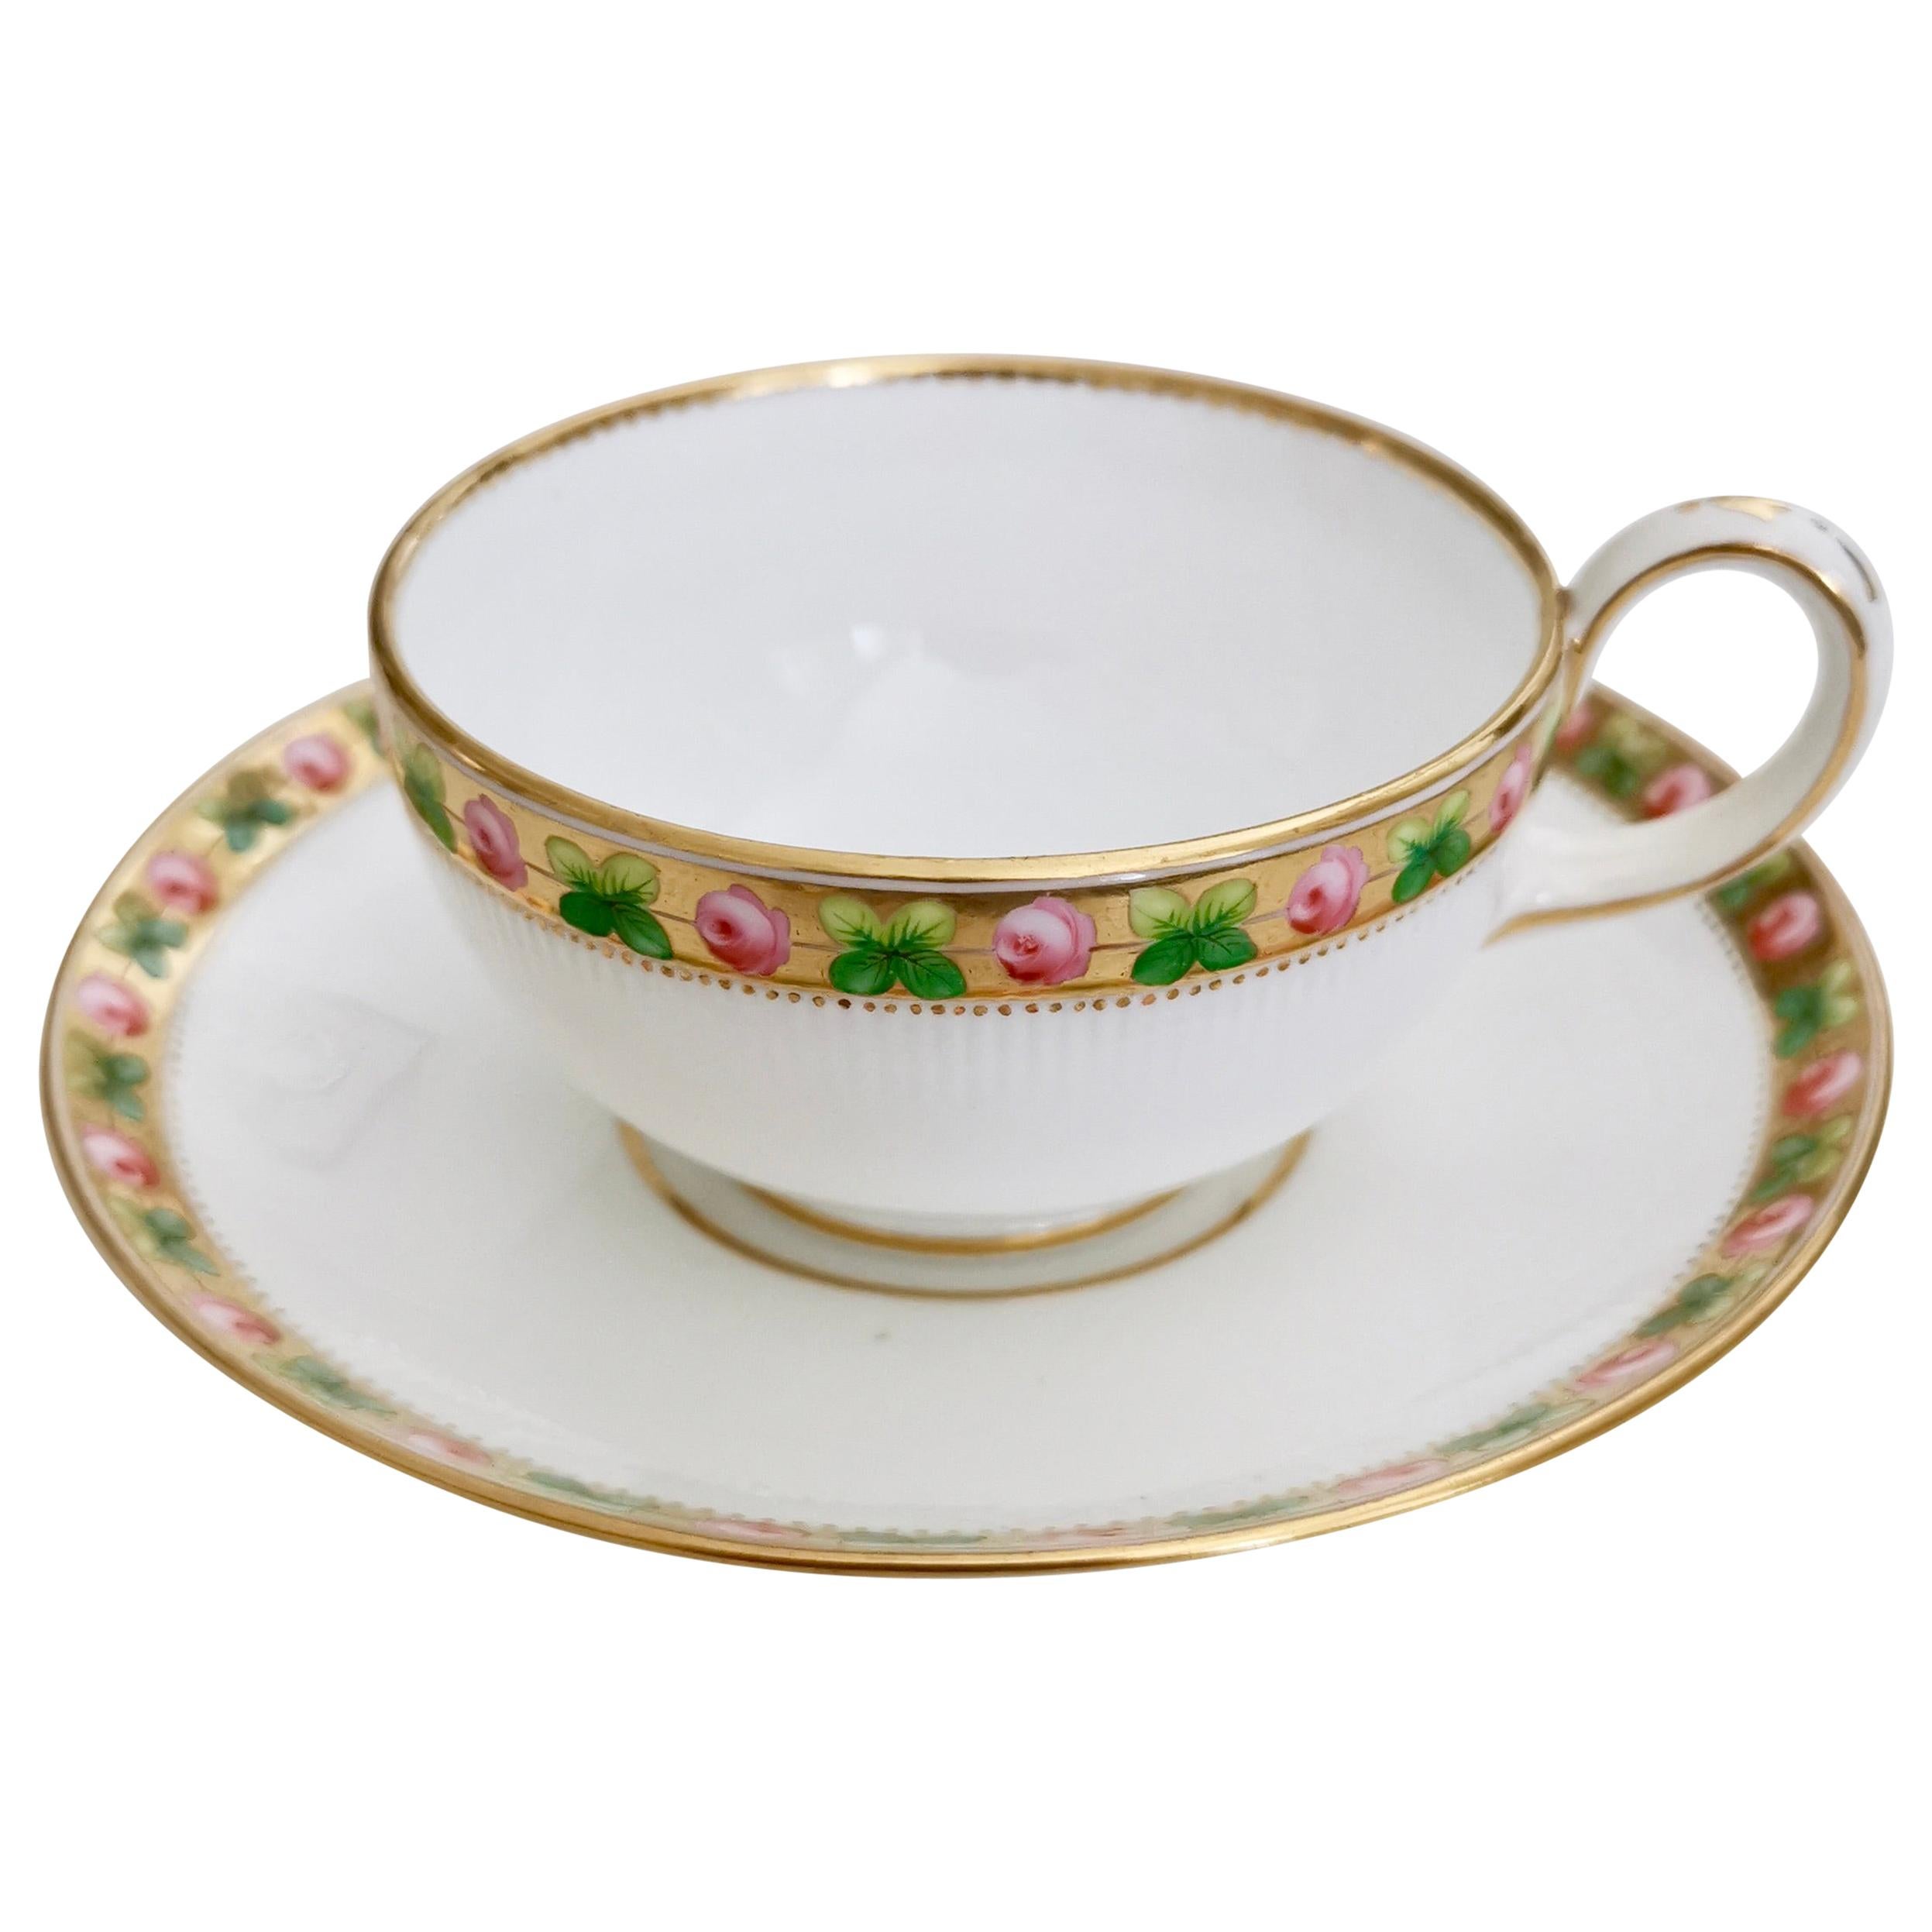 Minton Porcelain Teacup, White Paris Fluted with Roses and Gilt, 1862